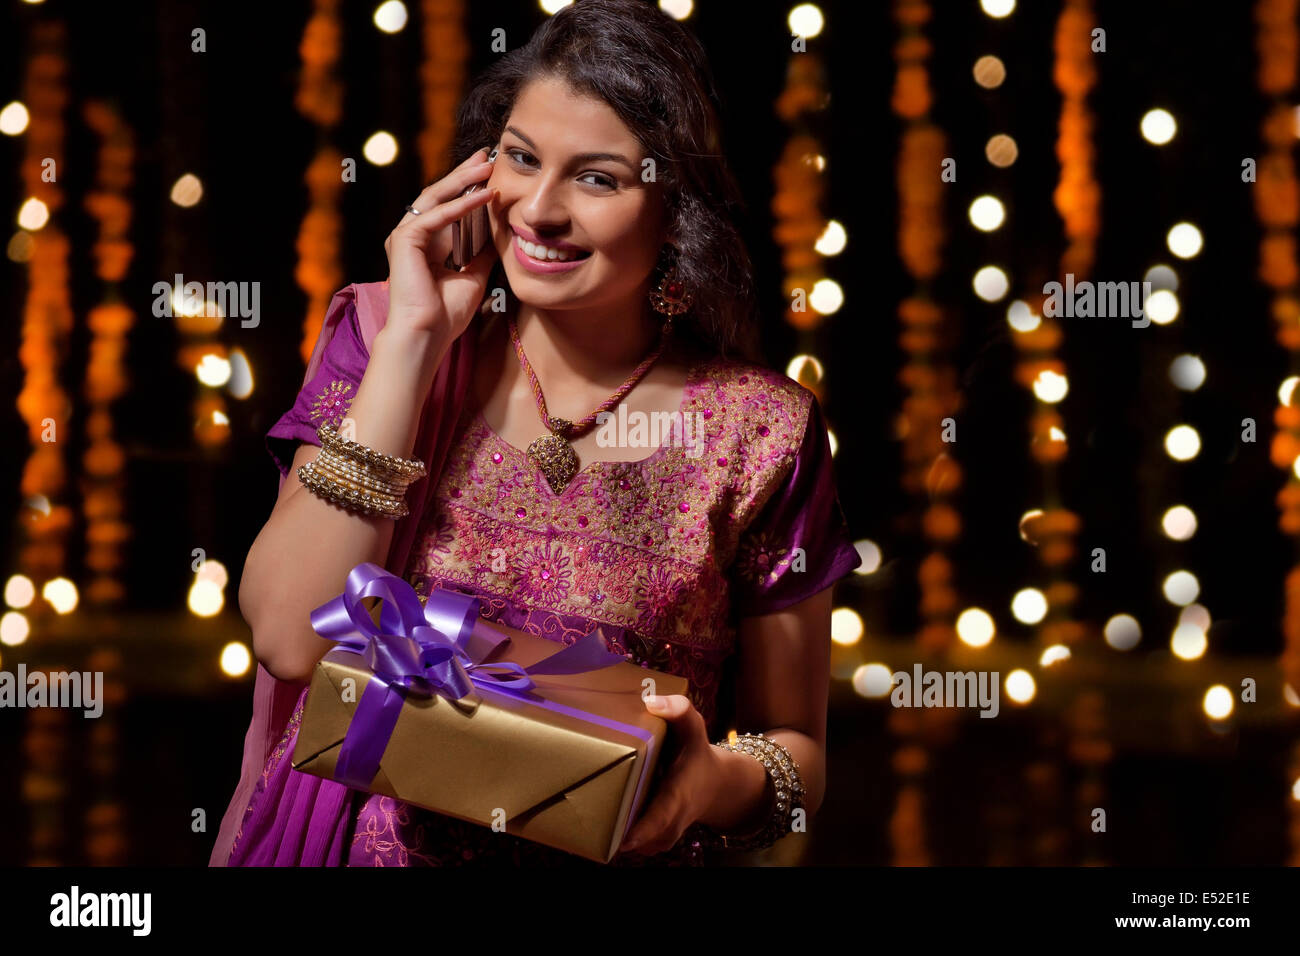 Portrait of woman with gift talking on mobile phone Stock Photo